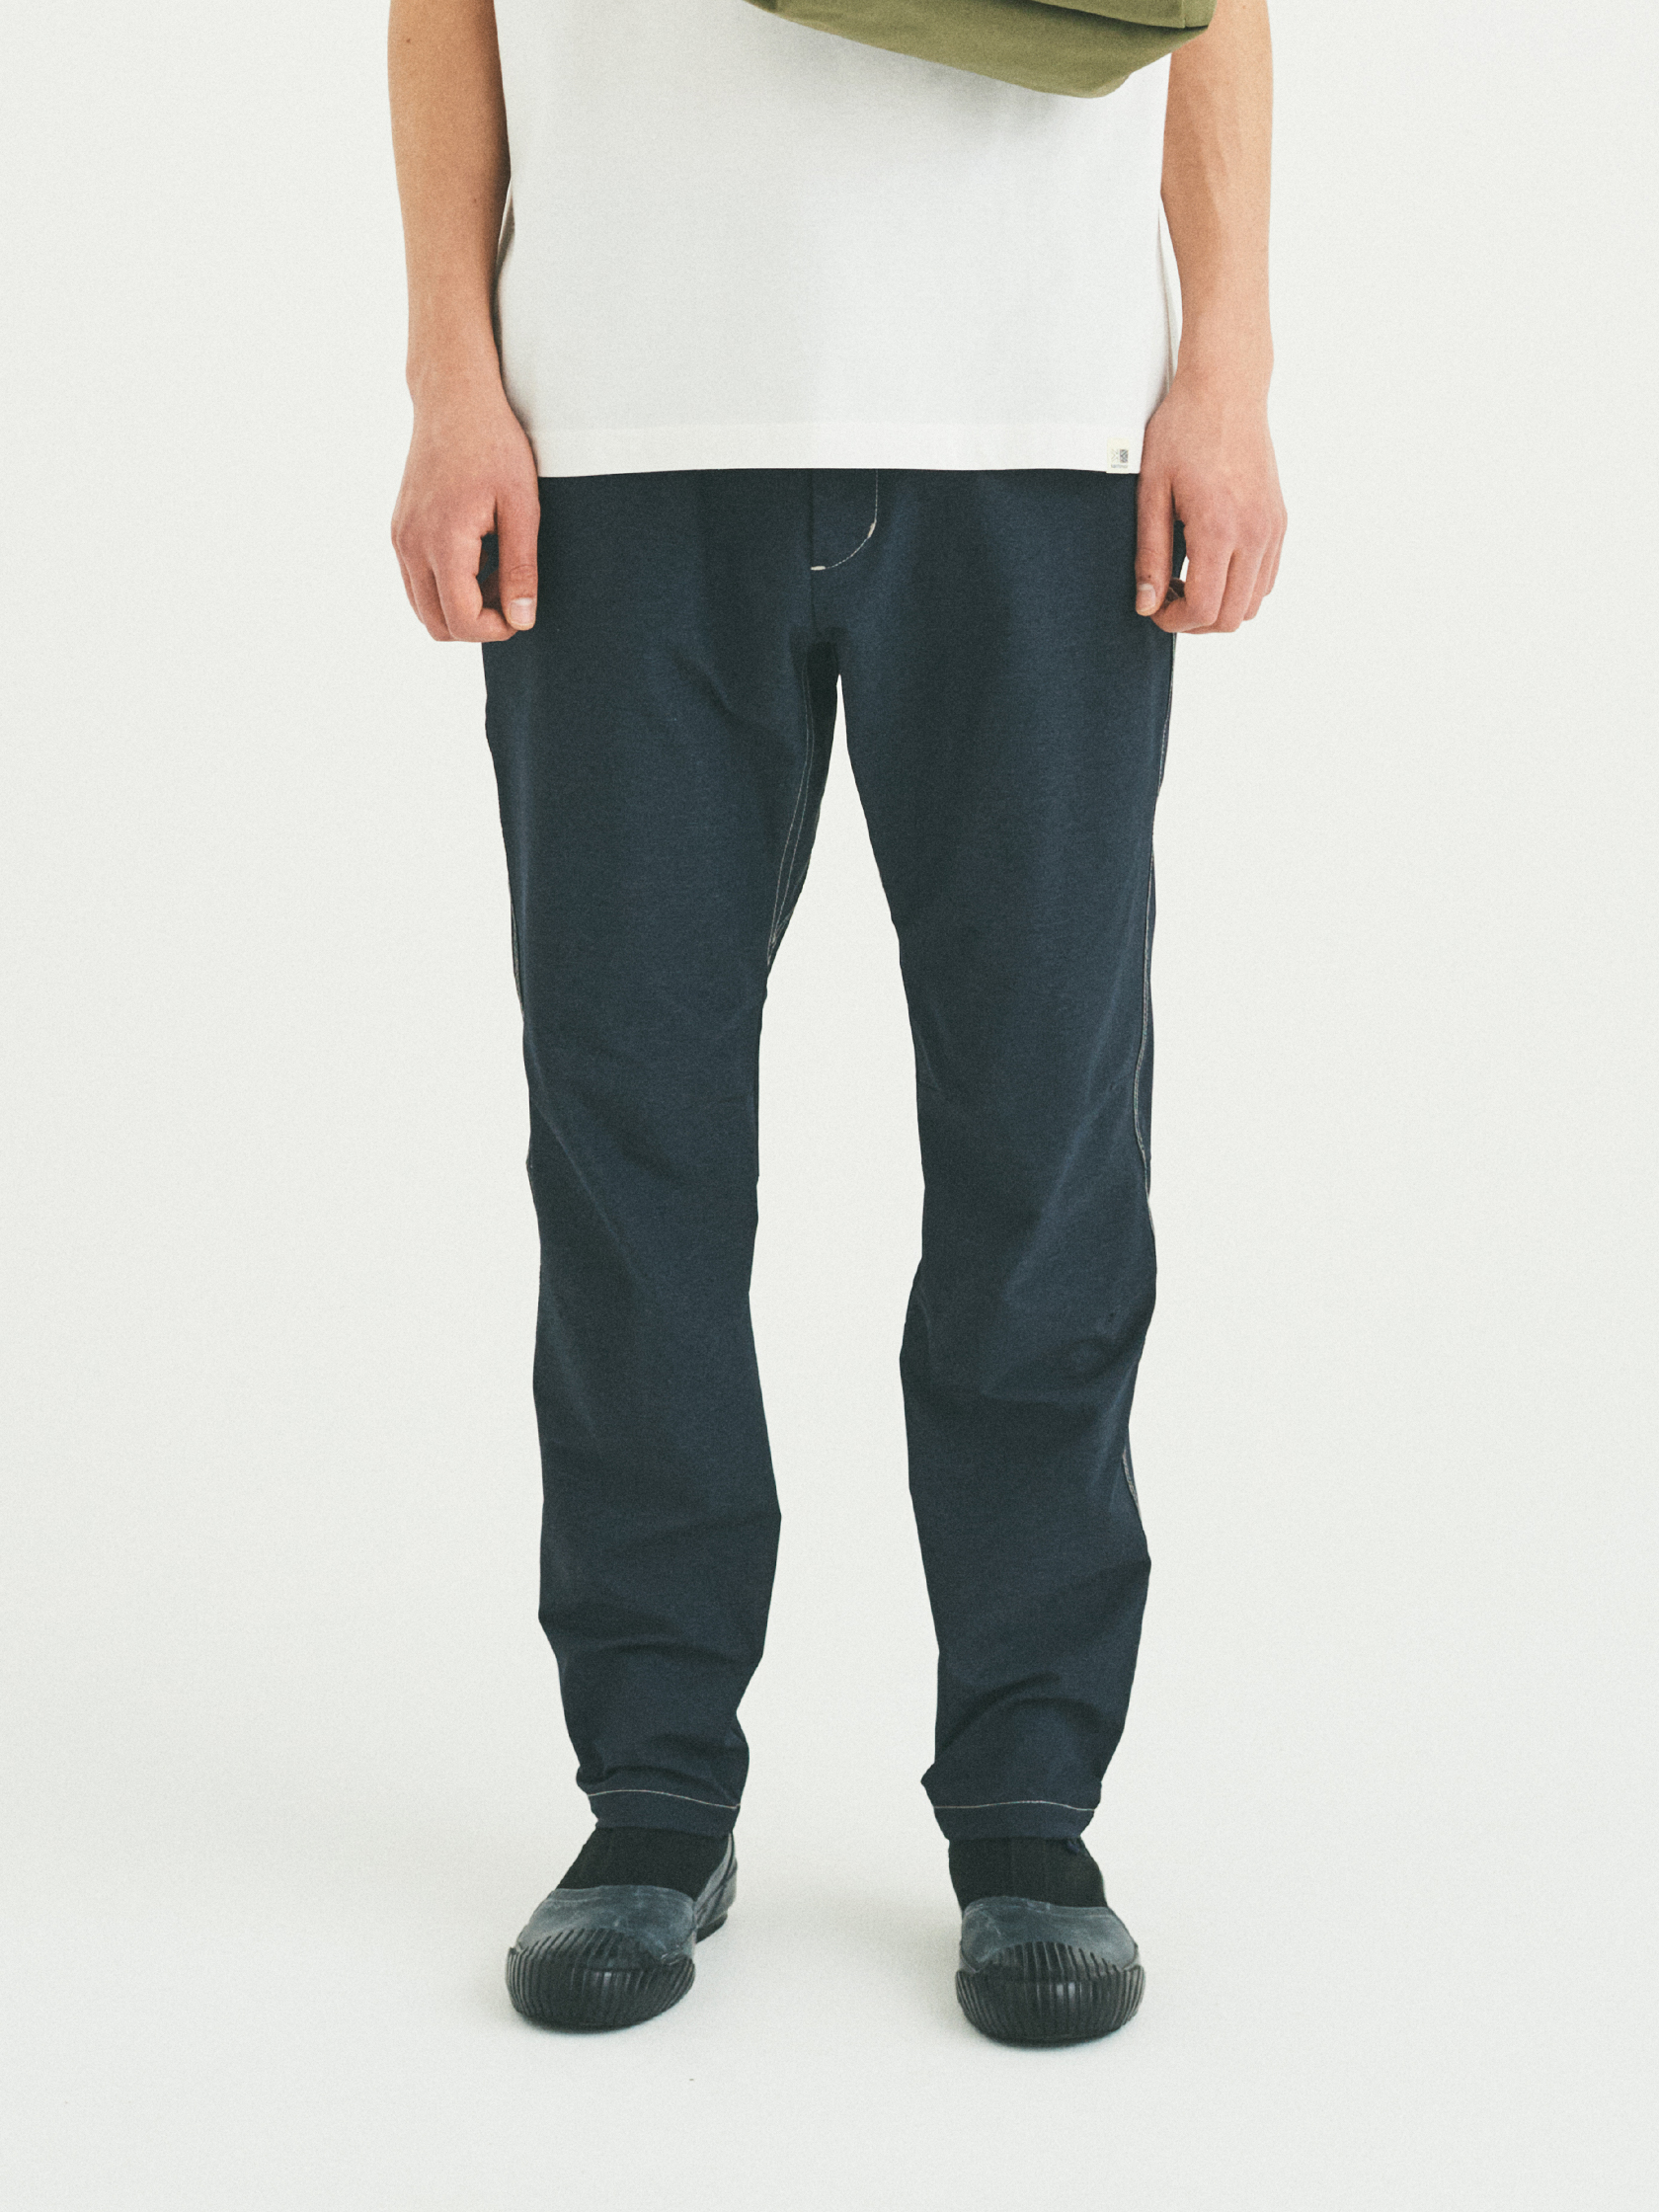 tapered stretch pants | karrimor カリマー | リュックサック ...